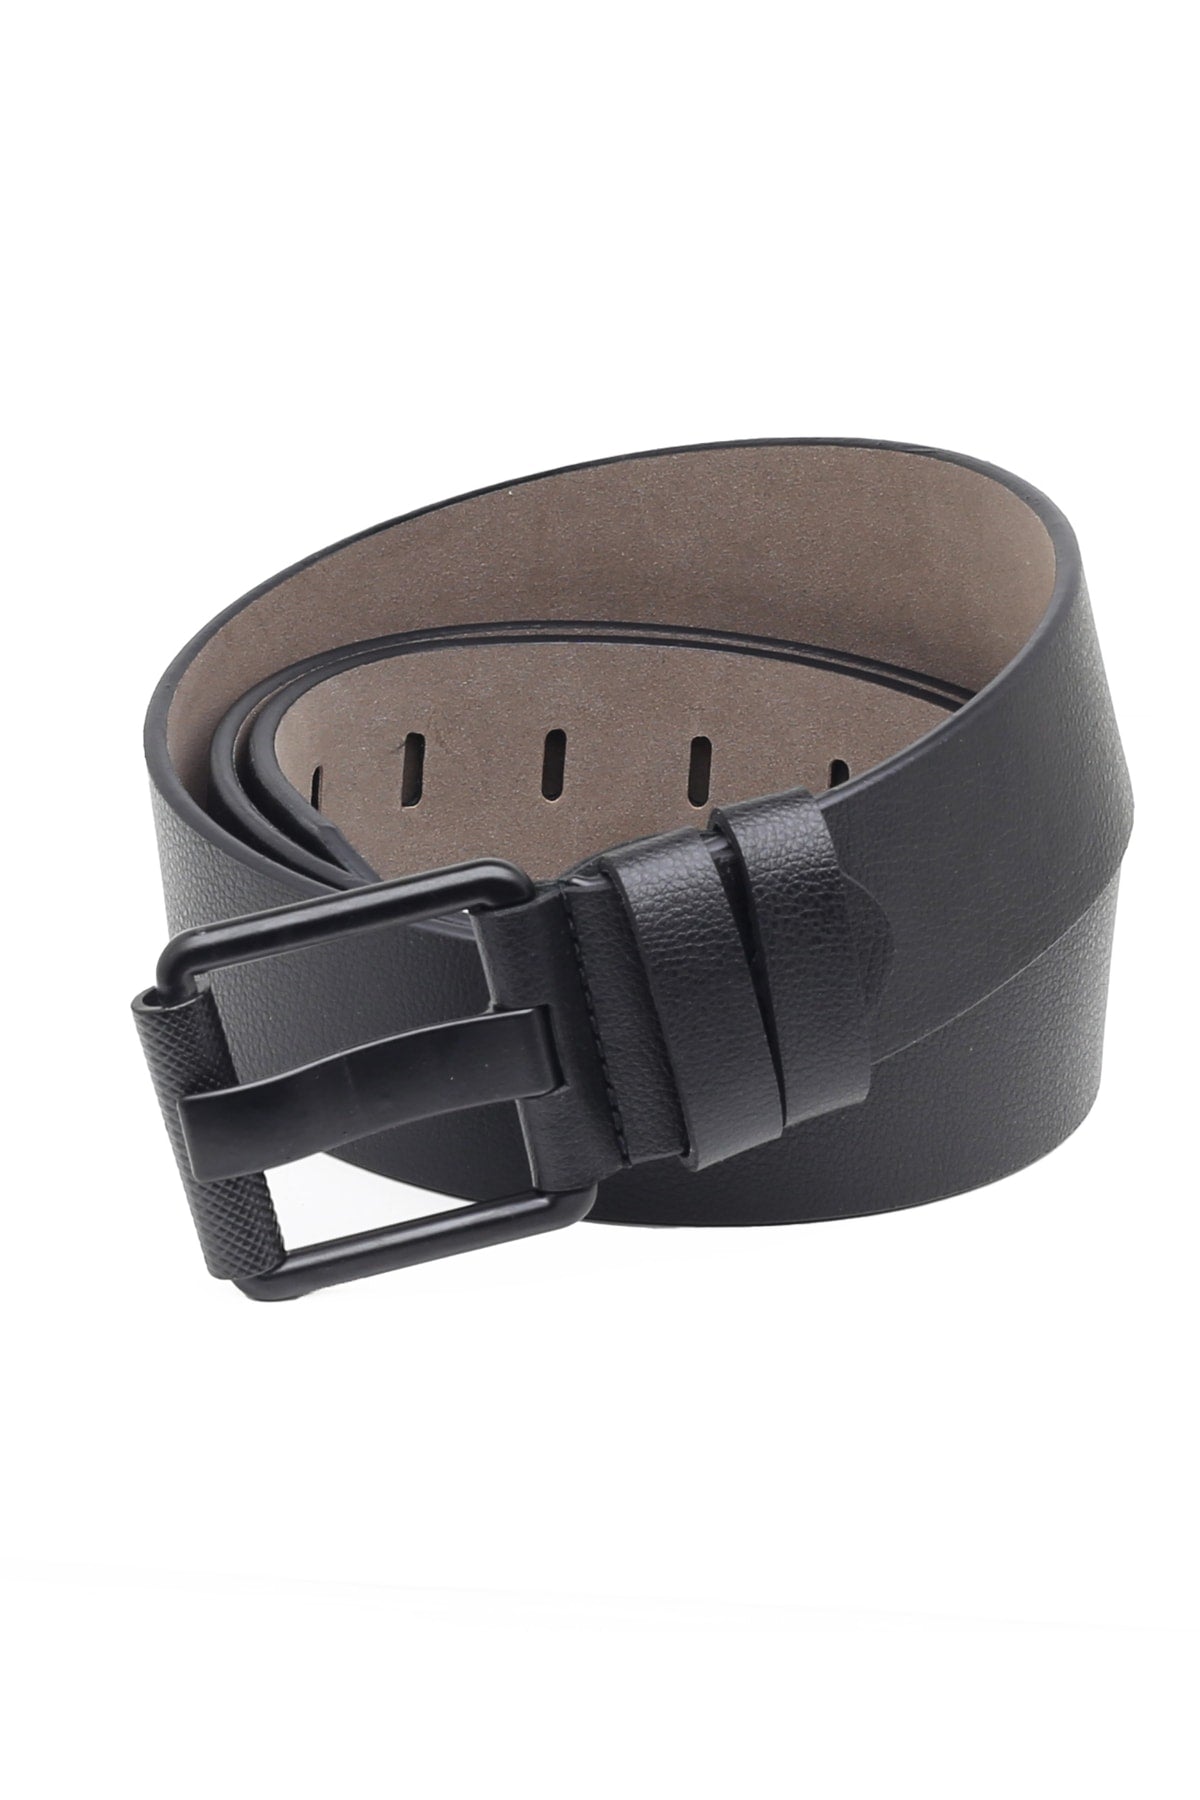 Sports Men's Belt Suitable For Jeans And Canvas